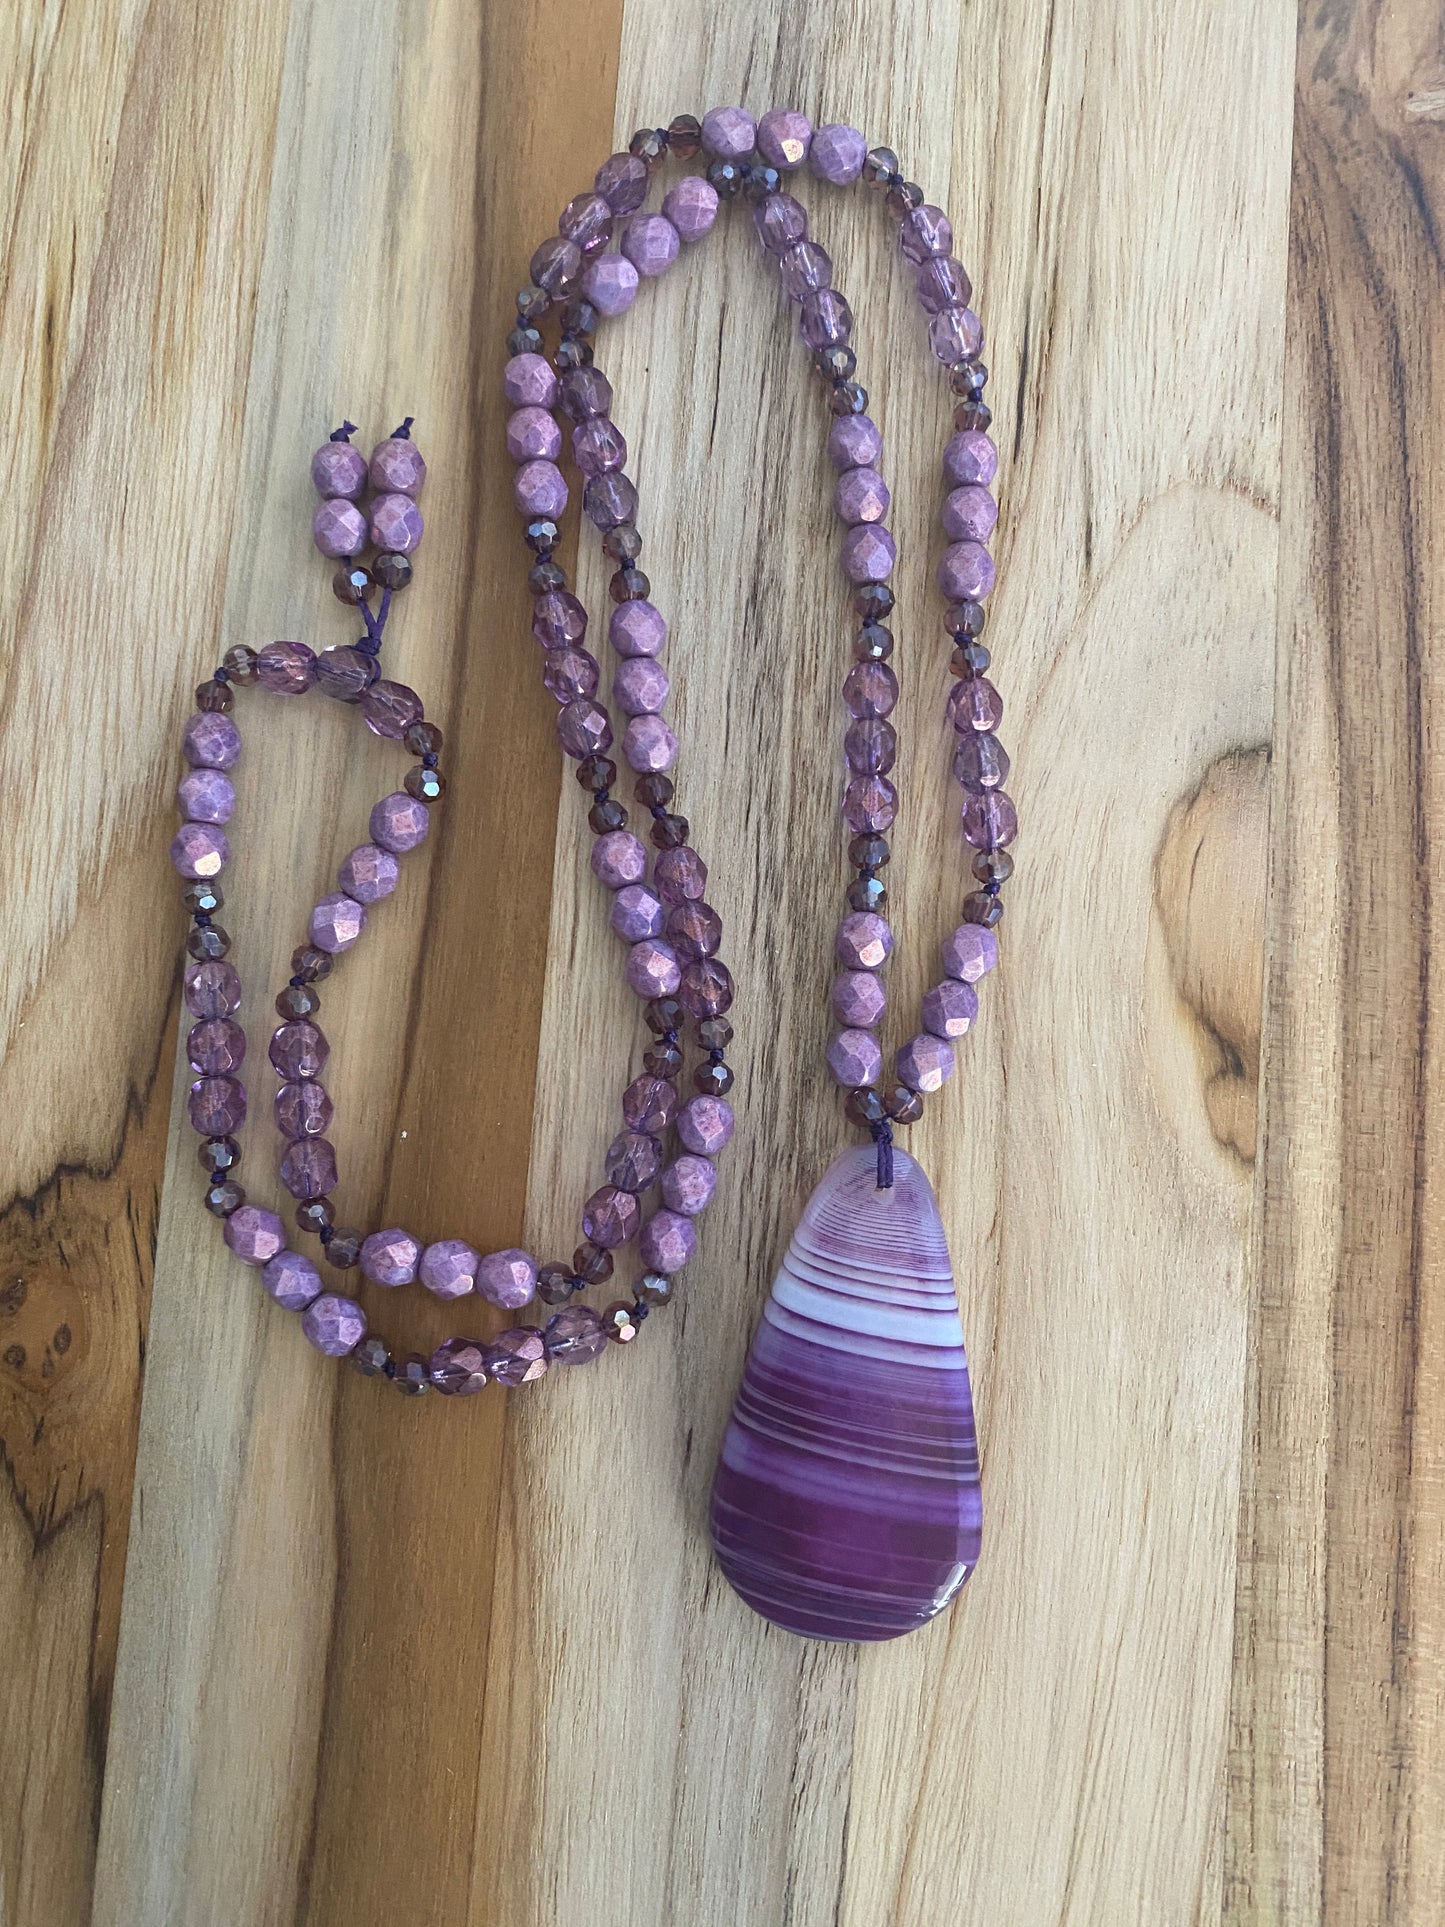 28" Long Purple Stripes Agate Beaded Necklace with Czech Glass & Crystal Beads